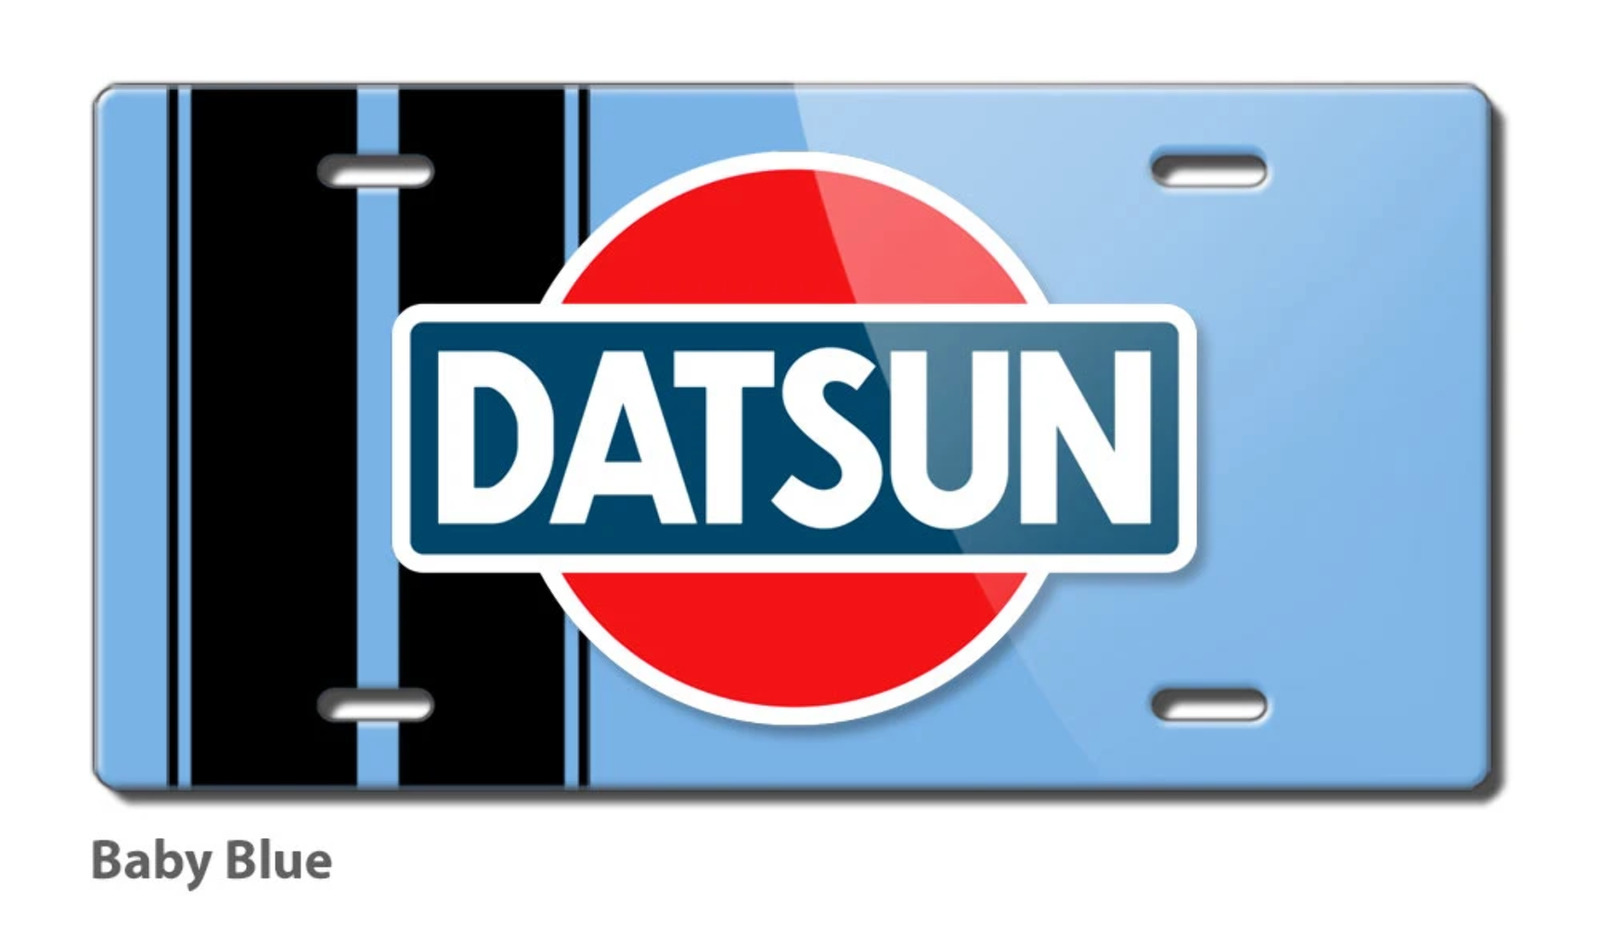 Datsun Emblem Novelty License Plate - Aluminum - 16 colors - Made in the USA